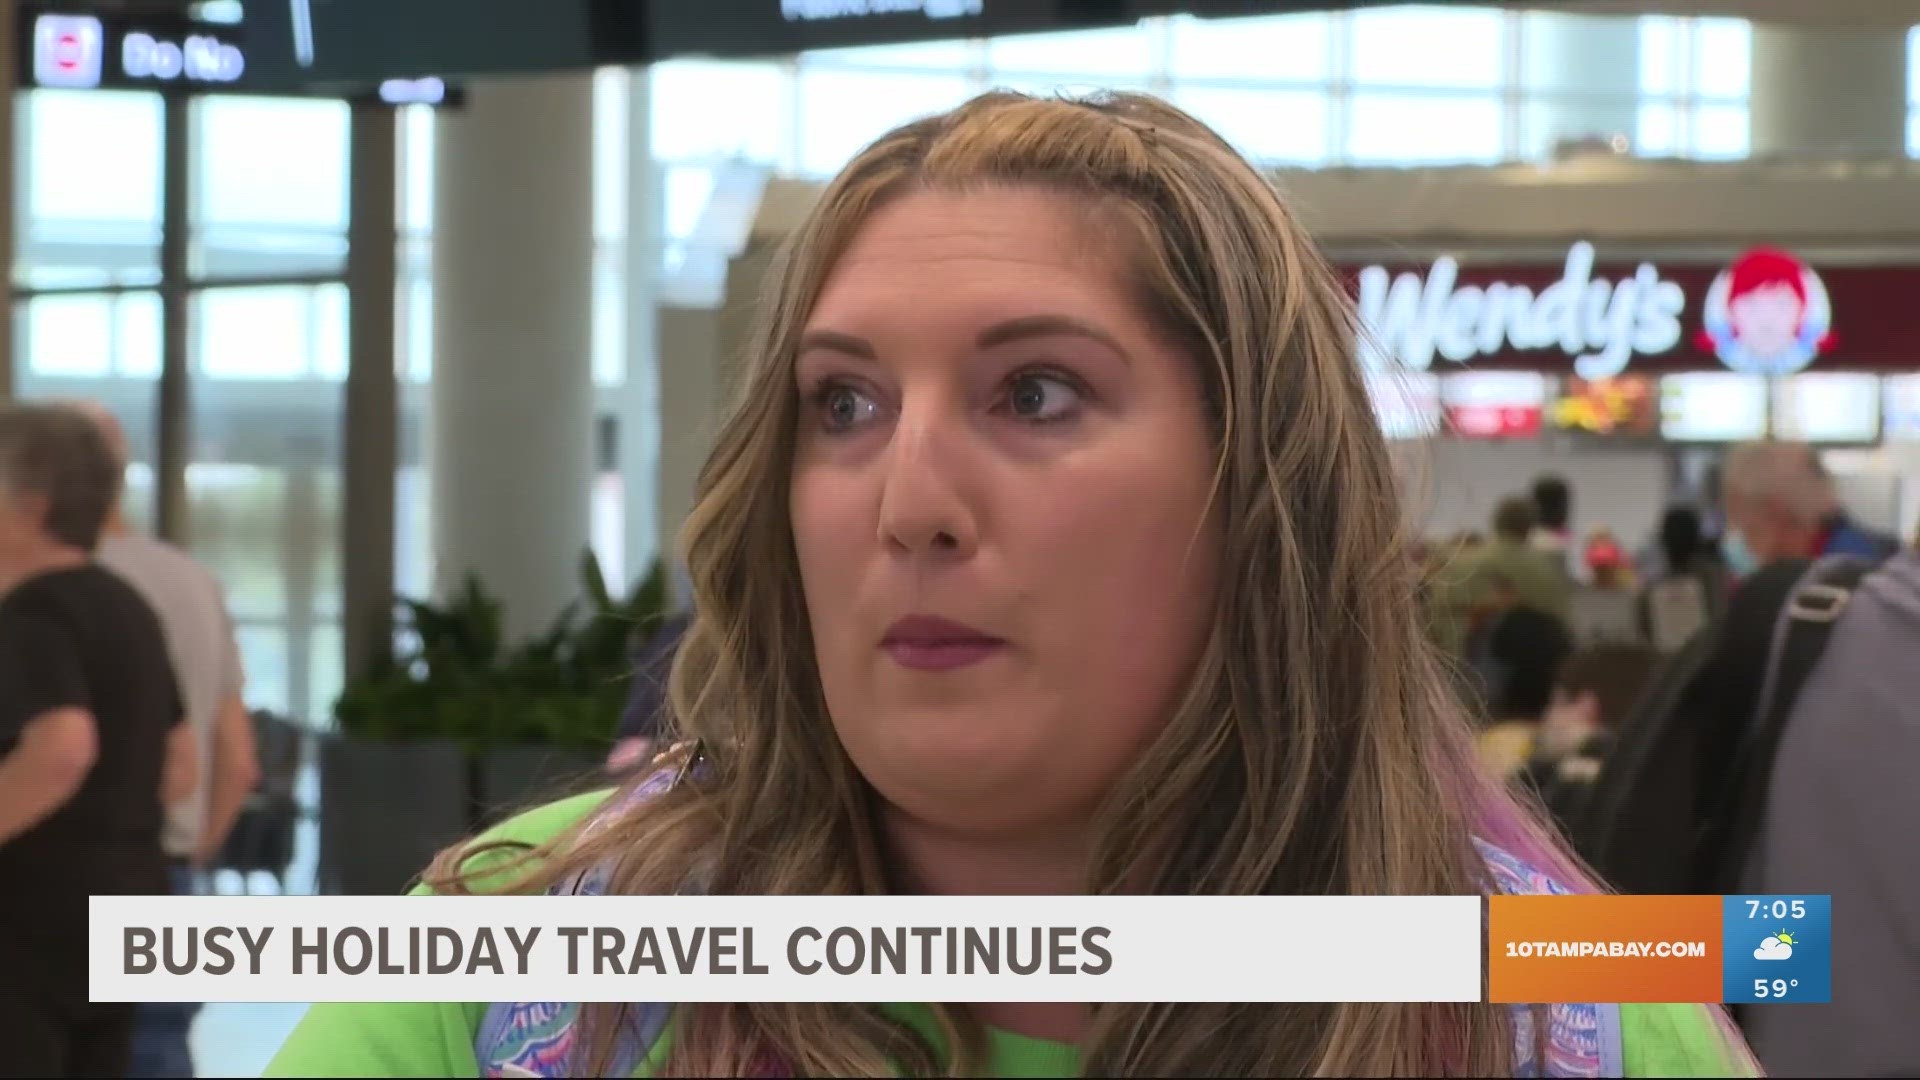 Tampa International sees among heaviest days for holiday travel